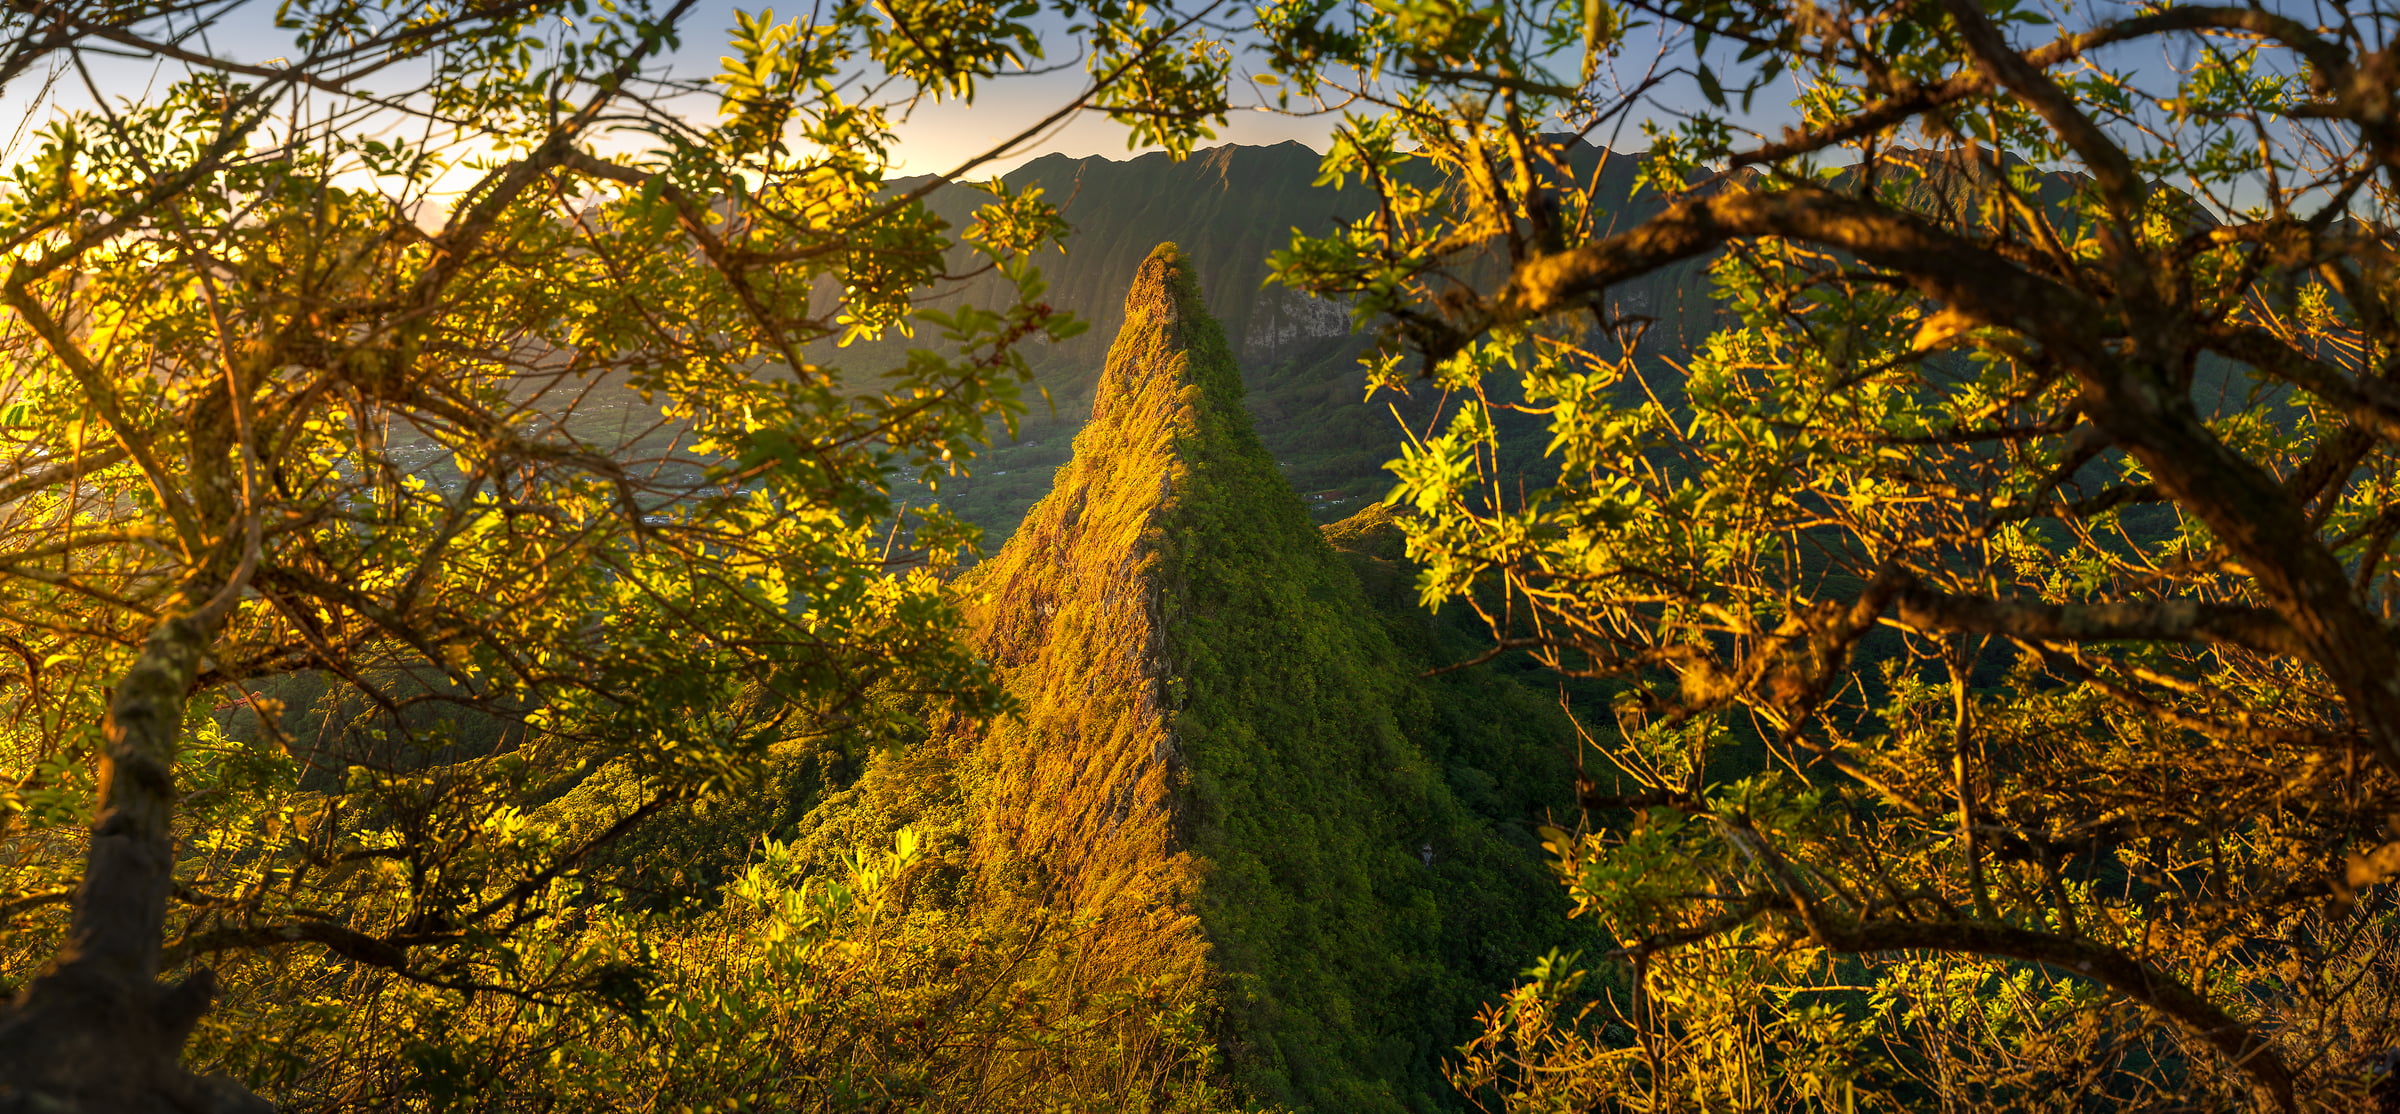 320 megapixels! A very high resolution artistic photo of a mountain ridge with jungle in the foreground; nature landscape photograph created by Jeff Lewis in Kaneohe, Hawaii.